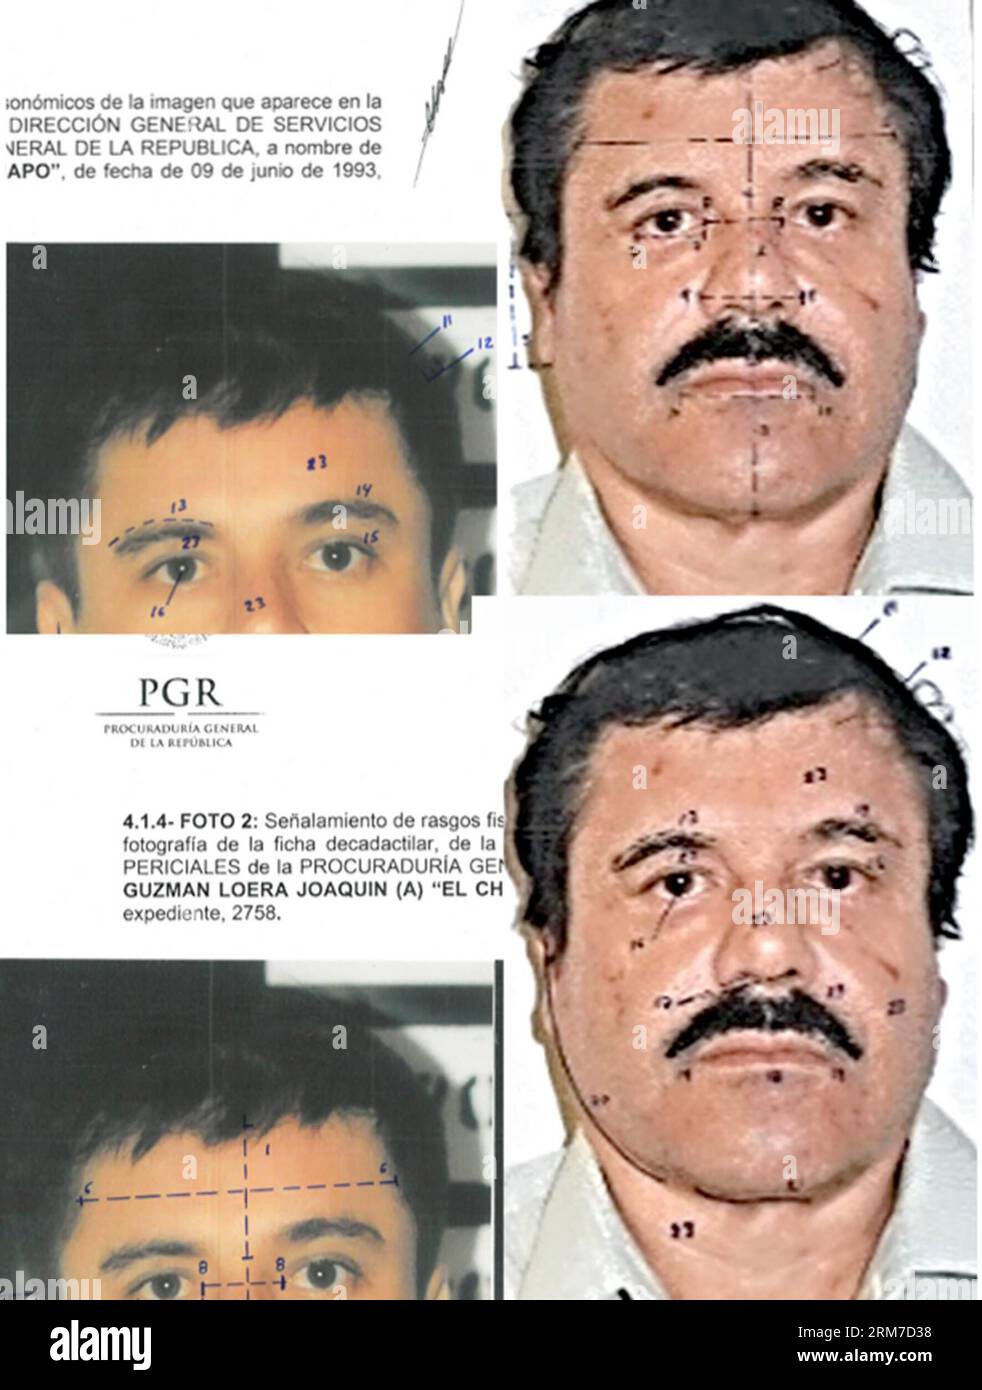 (140226) -- MEXICO CITY, Feb. 26, 2014 (Xinhua) -- This combo of photographs released by Mexico s Attorney General Office (PGR) with identification mapping marks made by the source to point out similarities in face measurements, shows Joaquin El Chapo Guzman, using images made from his 1993 and 2014 detentions. The Sinaloa Cartel leader was subjected to a buccal swab, a phisiognomic identity study and a test of 10 fingerprints. Federal courts in Mexico Tuesday formally charged Joaquin El Chapo Guzman, the captured leader of the Sinaloa drug cartel, with organized crime and drug trafficking. (X Stock Photo